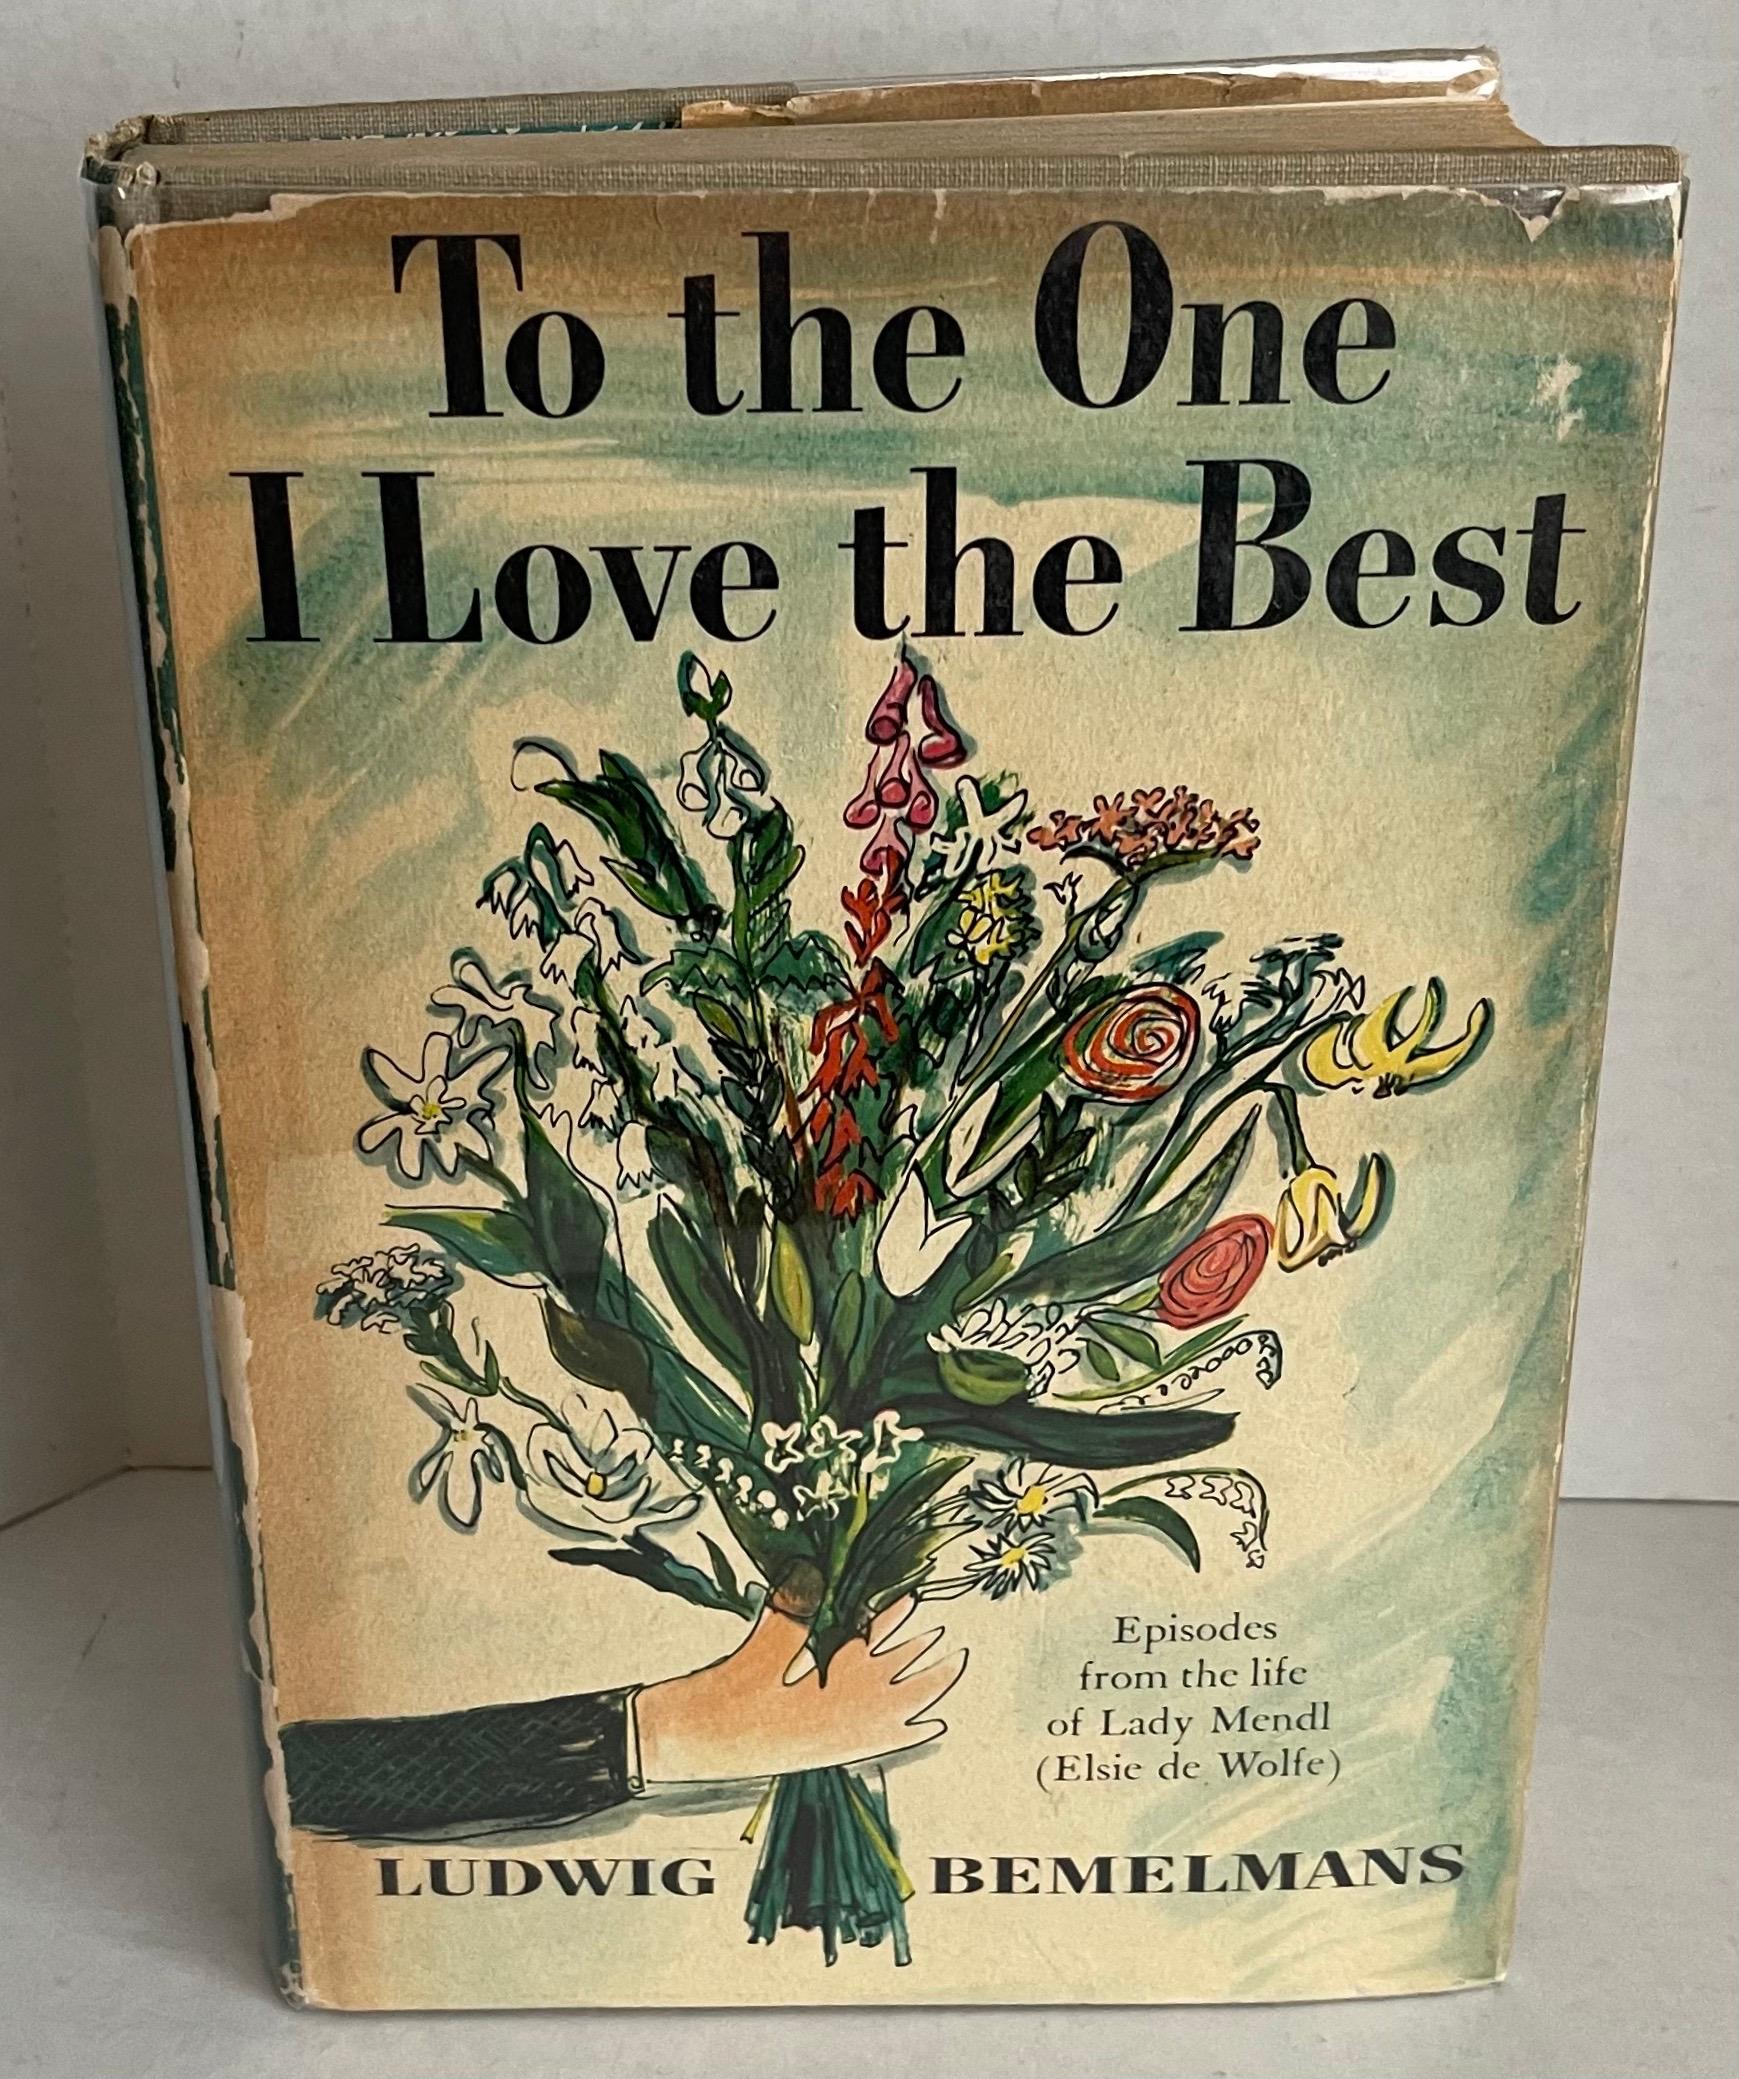 To the One I Love the Best 1955 by Ludwig Bemelmans. 255 pages, Hardcover. First edition Viking Press. January 1, 1955.
Clear Mylar jacket has been added to protect the original book jacket. 